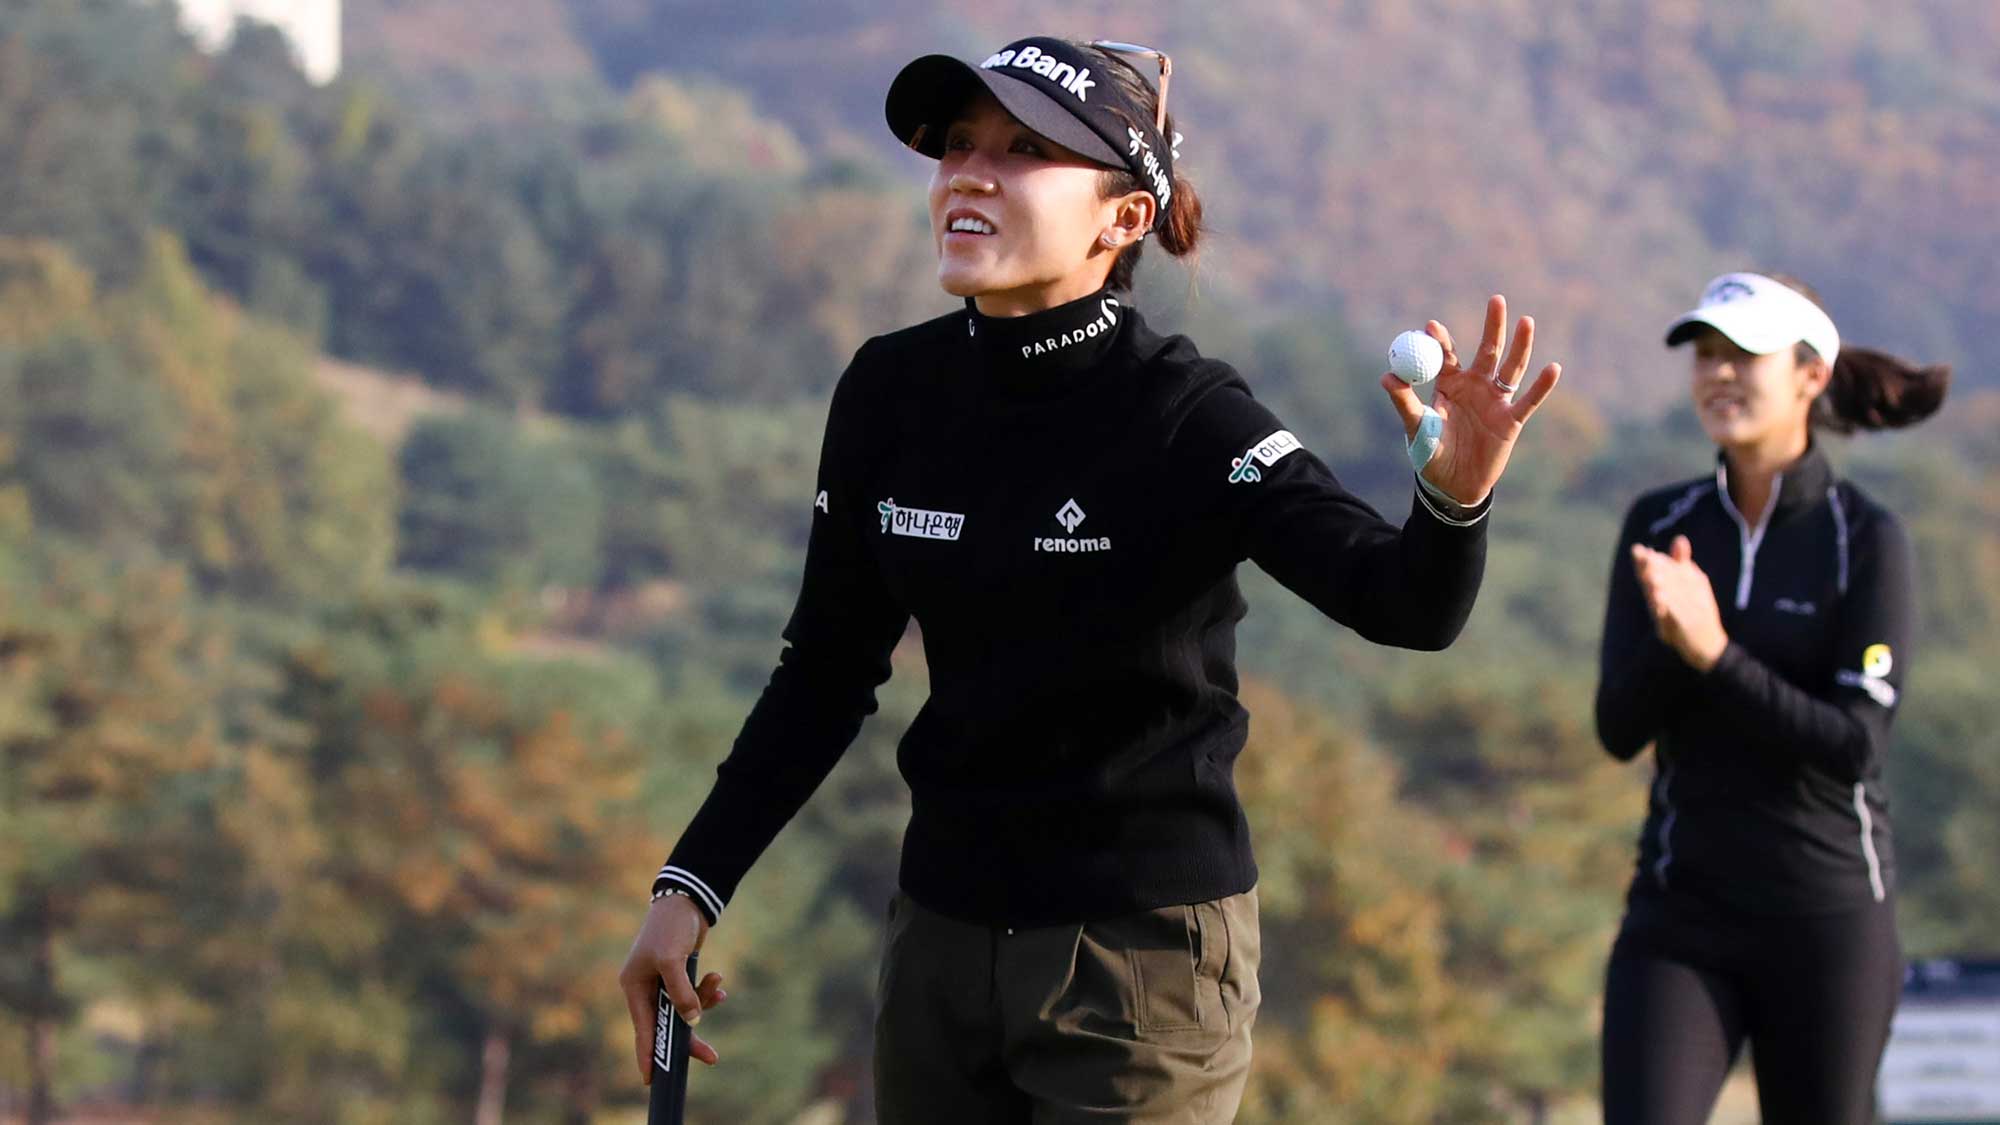 Lydia Ko of New Zealand celebrates winning the tournament on the 18th green during the final round of the BMW Ladies Championship